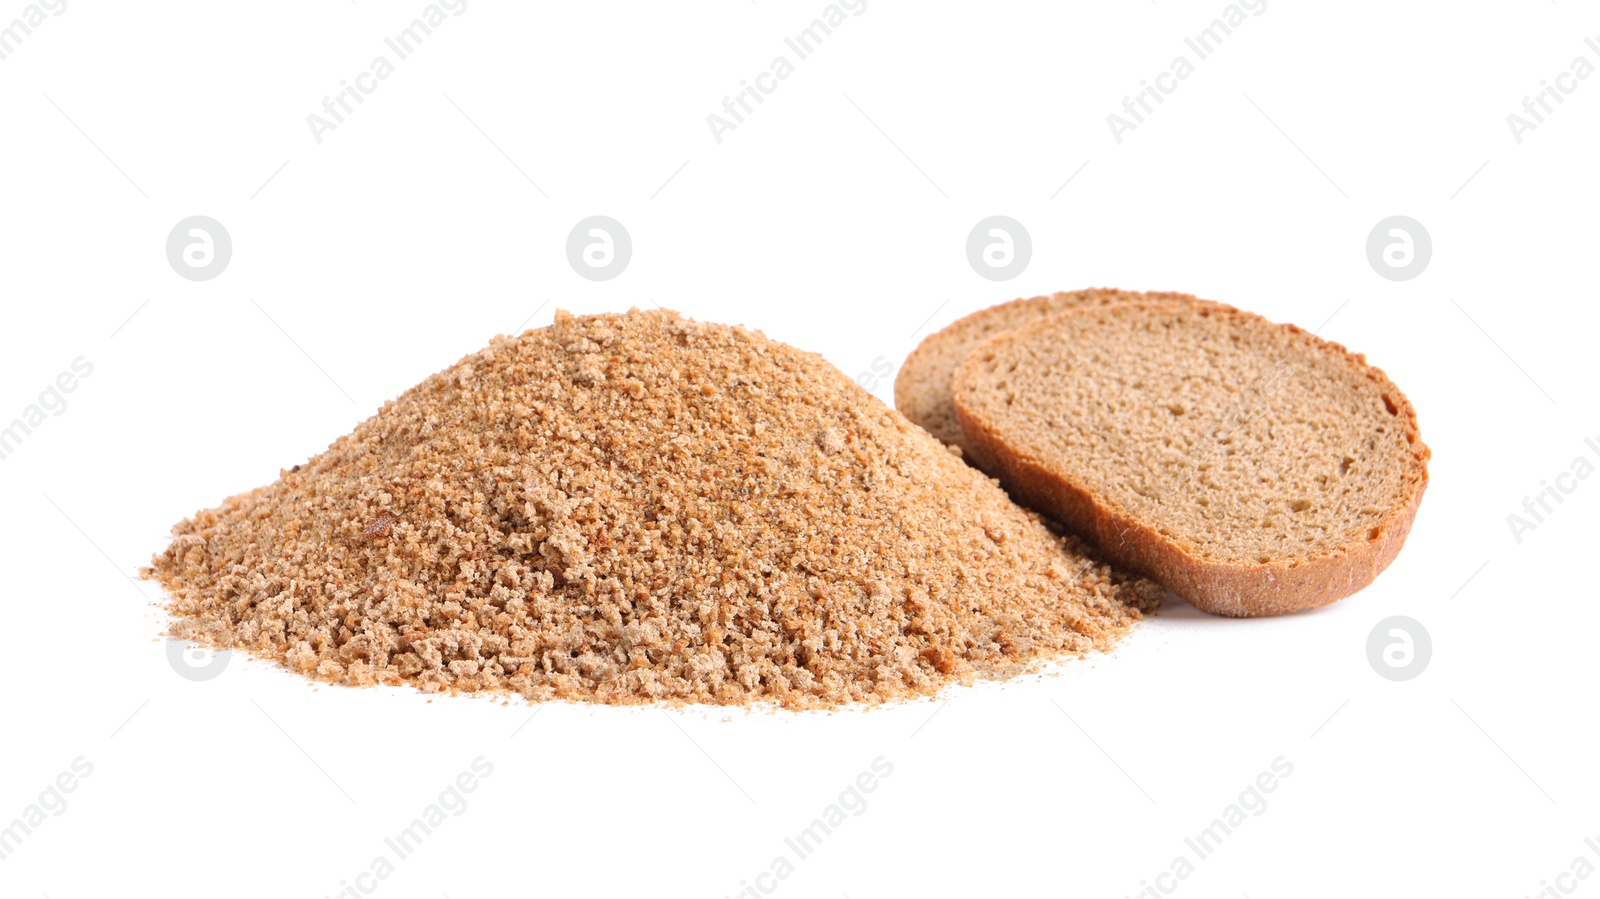 Photo of Fresh bread crumbs and slices of loaf on white background